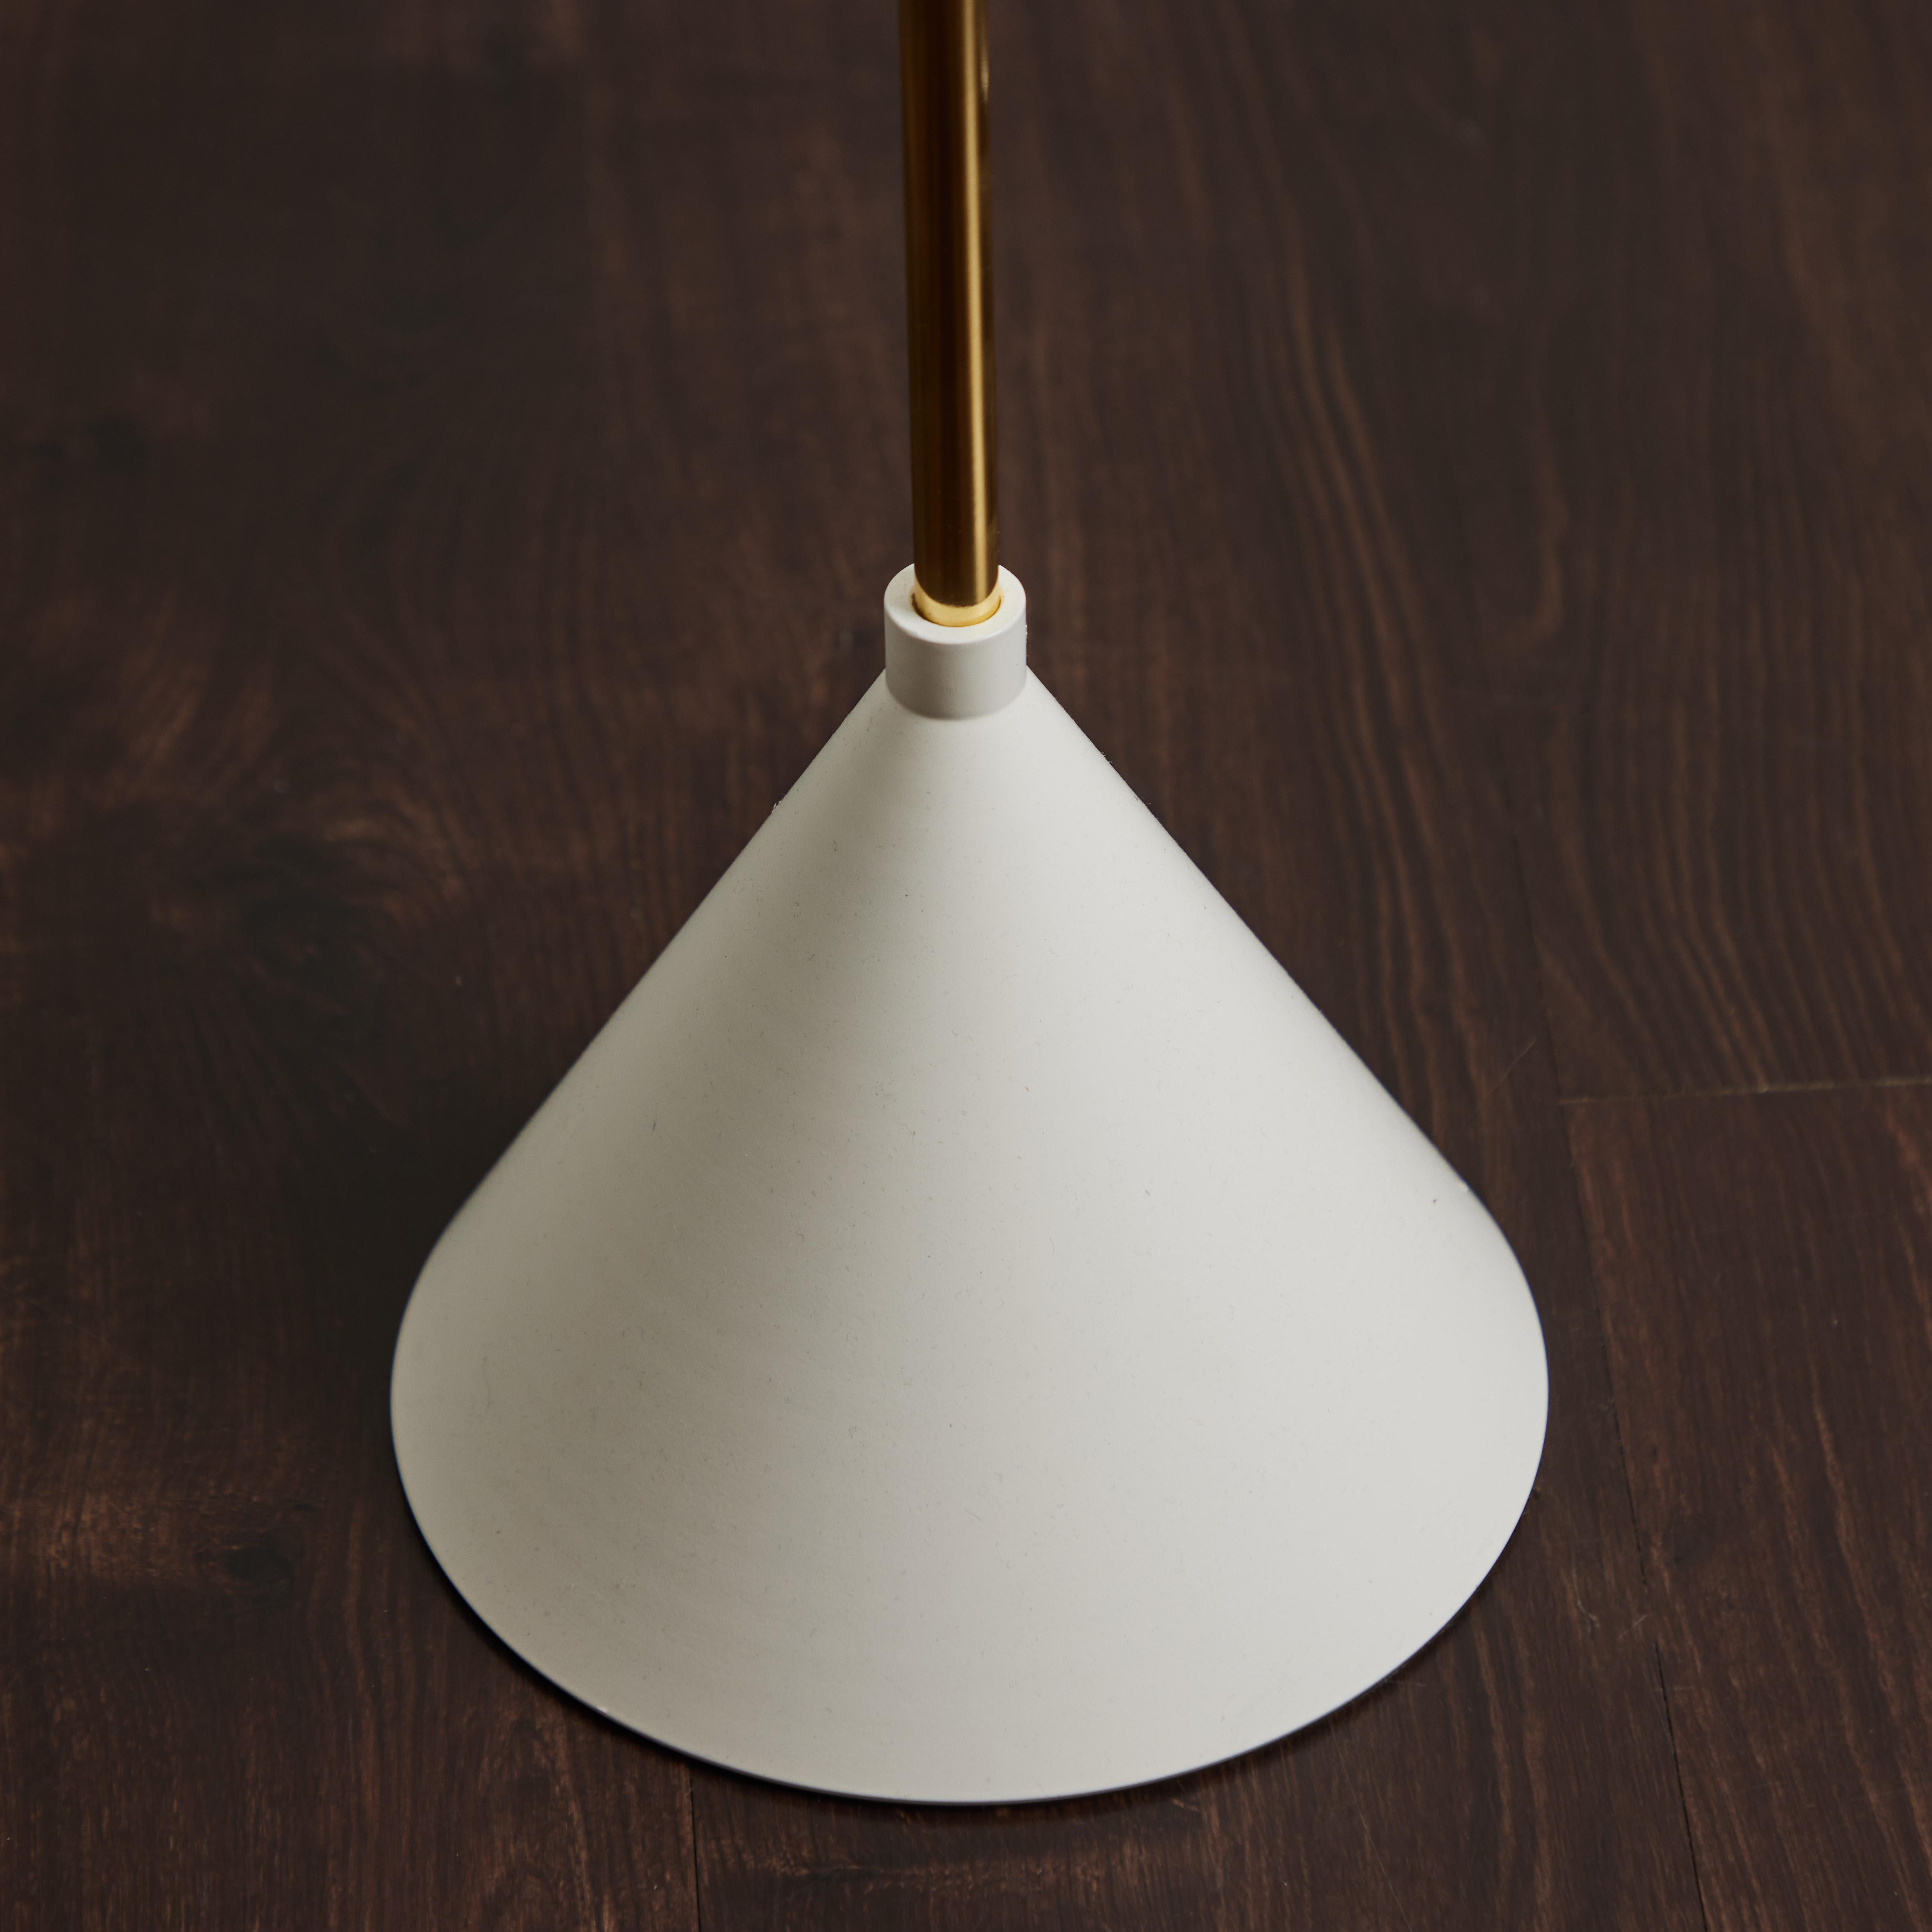 Tapio Wirkkala 'Crane' Articulating Floor Lamp in White for Innolux Oy For Sale 2